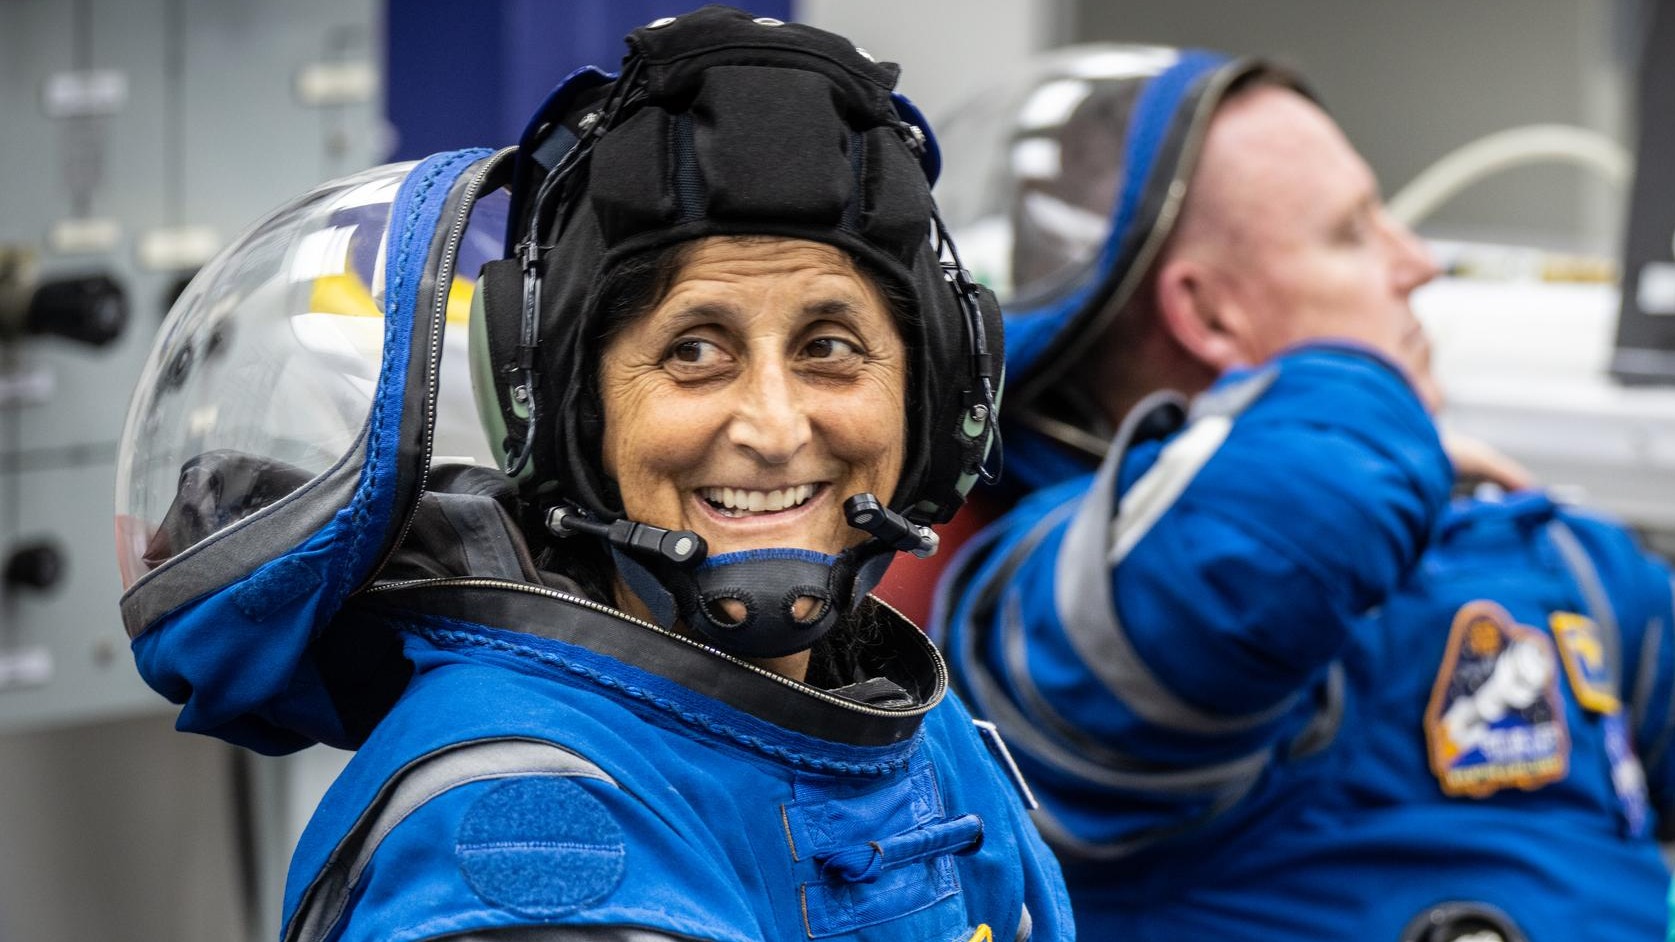 Two astronauts in space suits with visors open: Suni Williams in front, smiling at the camera, and Butch Wilmore in the back, looking off-screen.